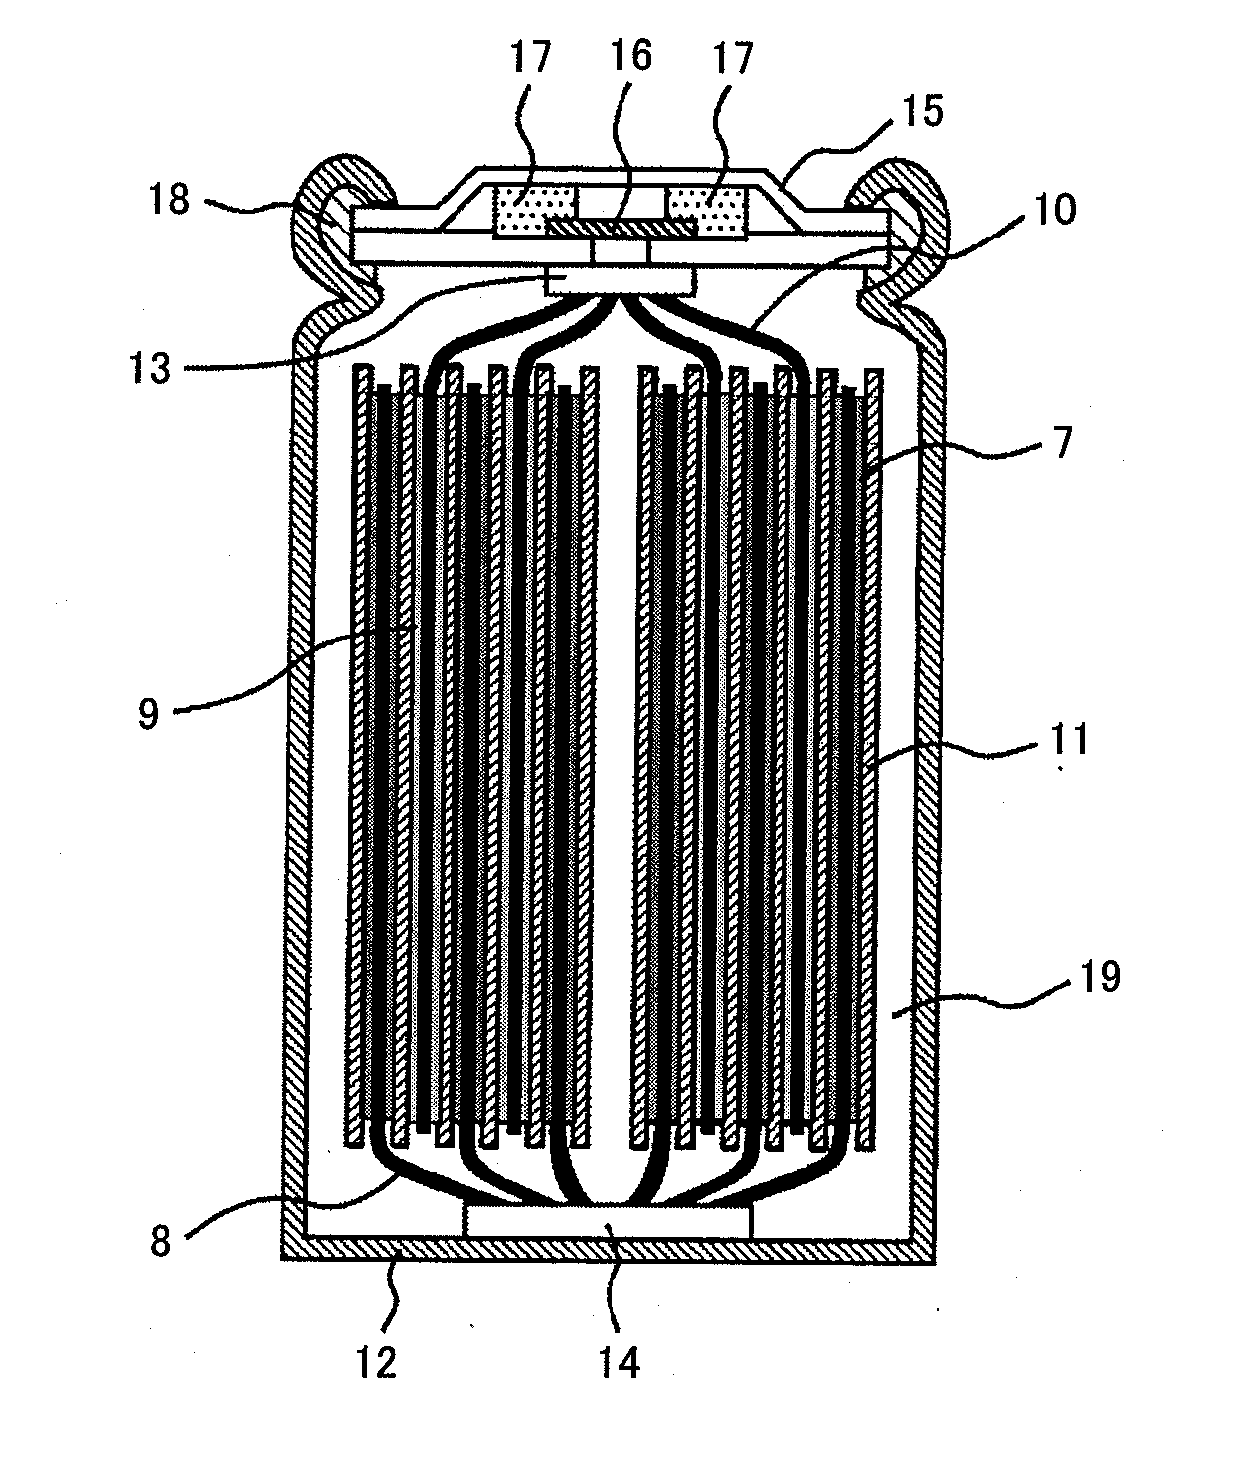 Lithium-ion secondary battery